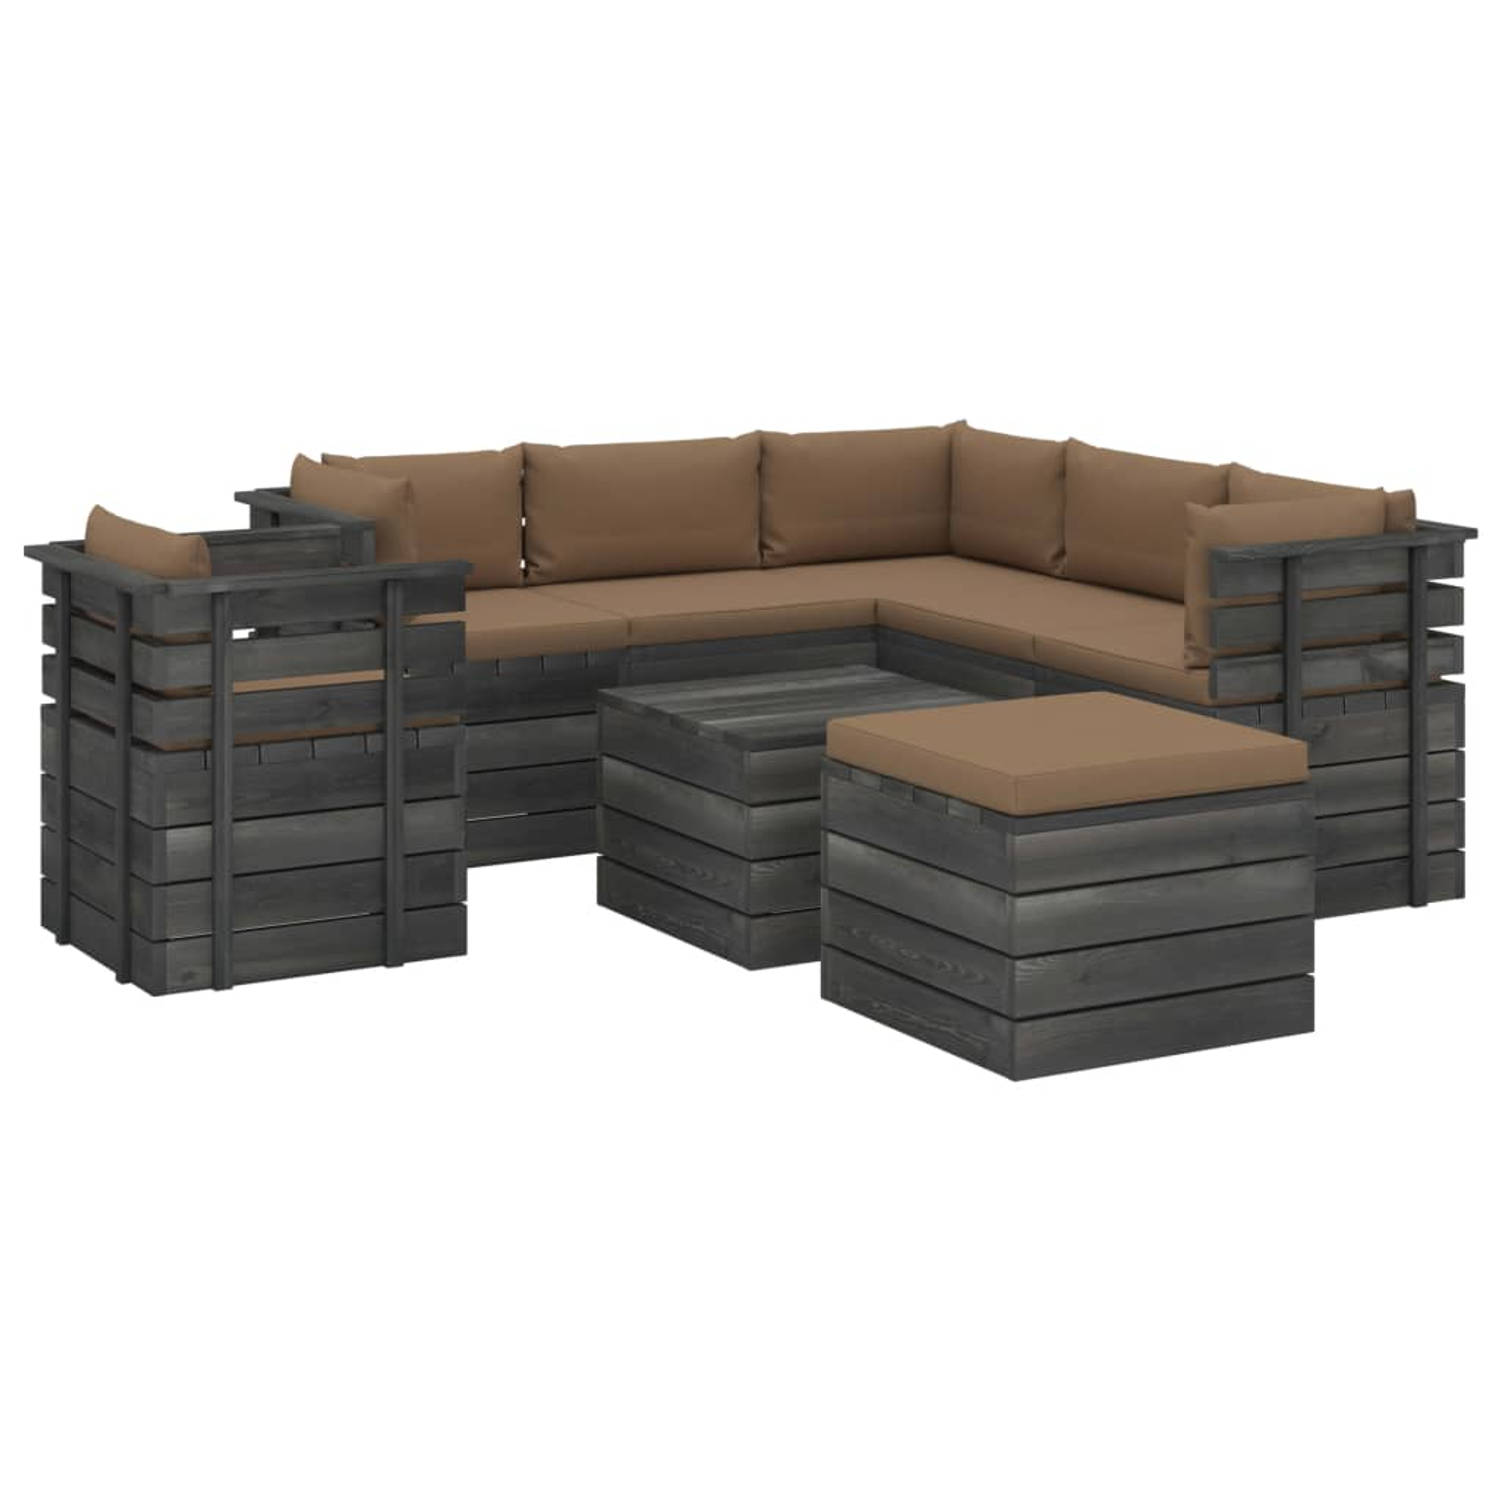 The Living Store Pallet Lounge Set - Garden Furniture - 70x65x71.5 cm - Solid Pine Wood - Taupe